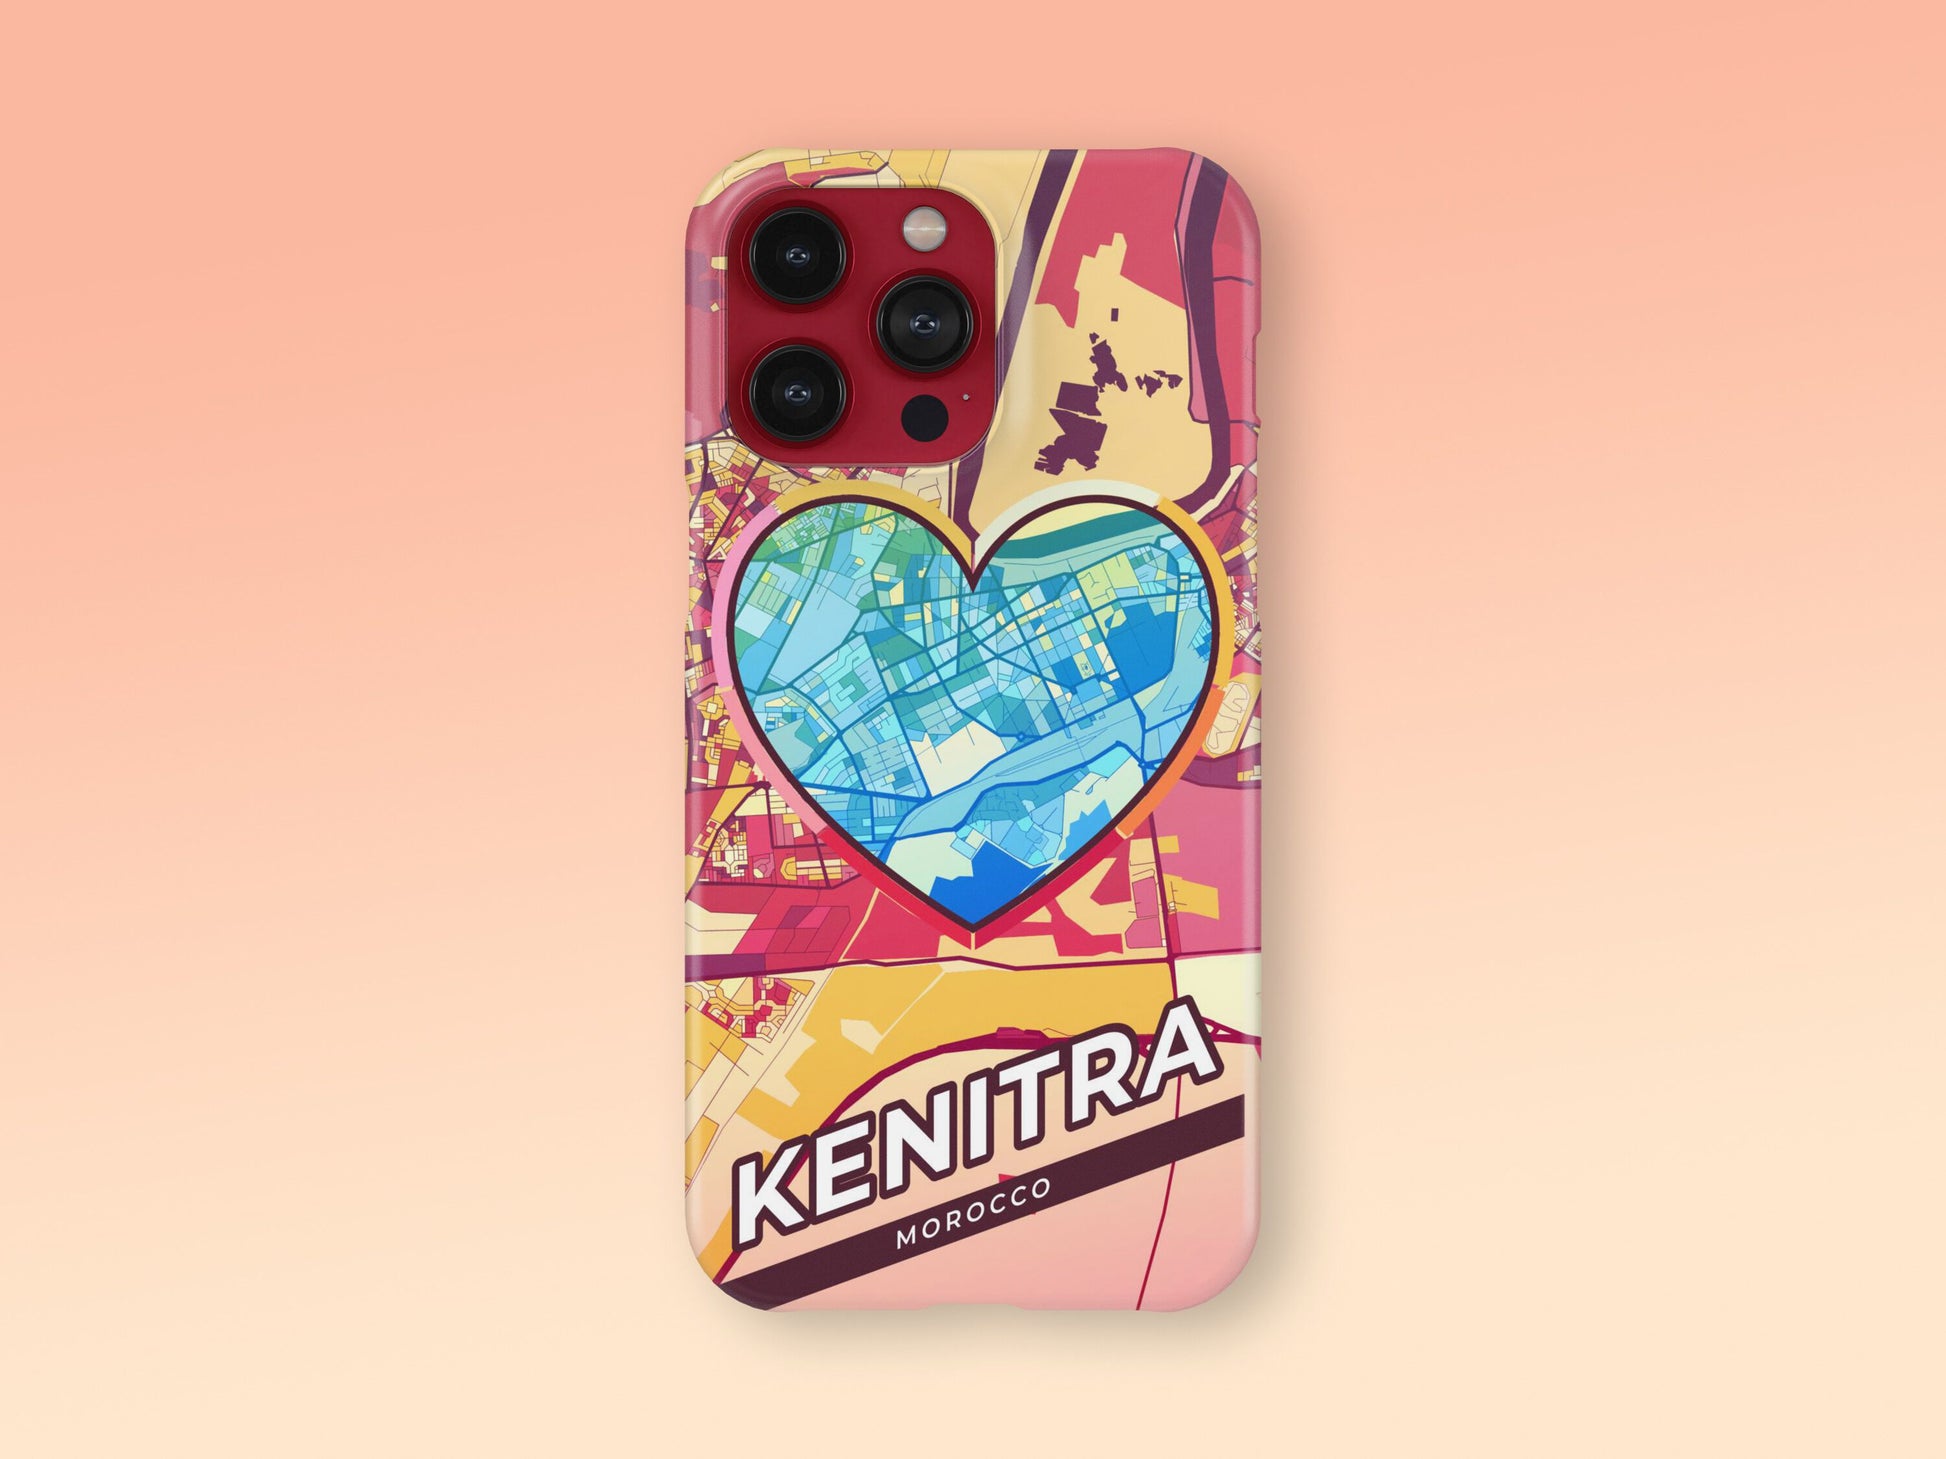 Kenitra Morocco slim phone case with colorful icon. Birthday, wedding or housewarming gift. Couple match cases. 2